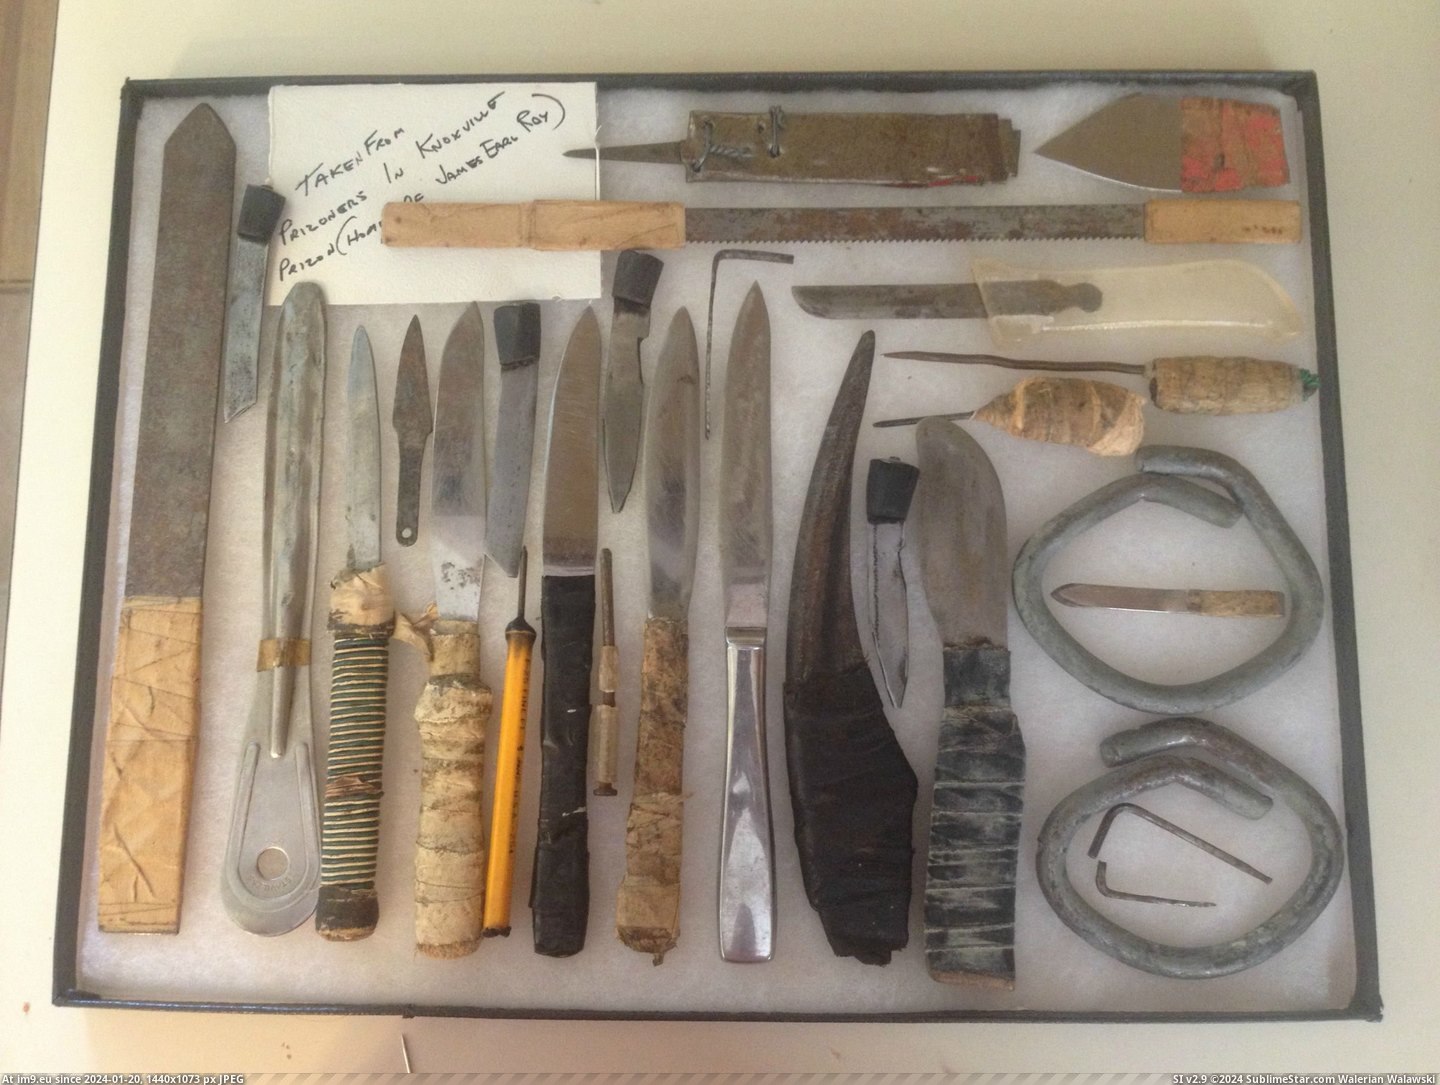 #Collection #Wtf #Shanks #Prison #Confiscated [Wtf] My collection of confiscated prison shanks Pic. (Изображение из альбом My r/WTF favs))